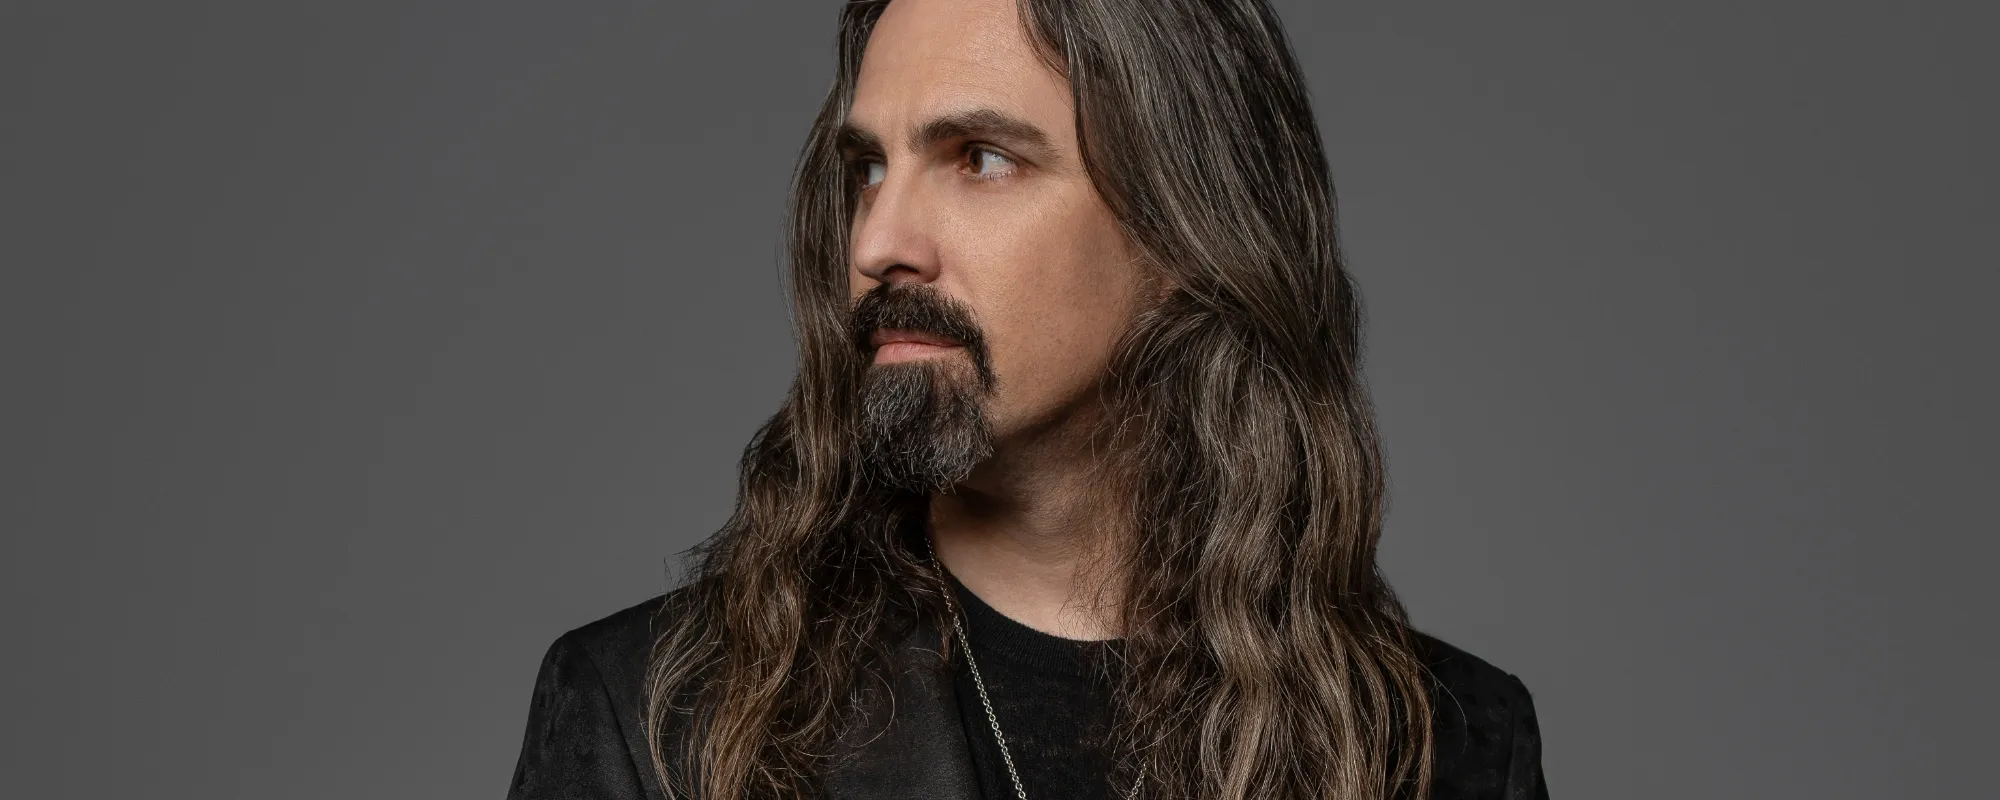 Composer Bear McCreary Announces Concept Album Project ‘The Singularity’ With Legendary Collaborators